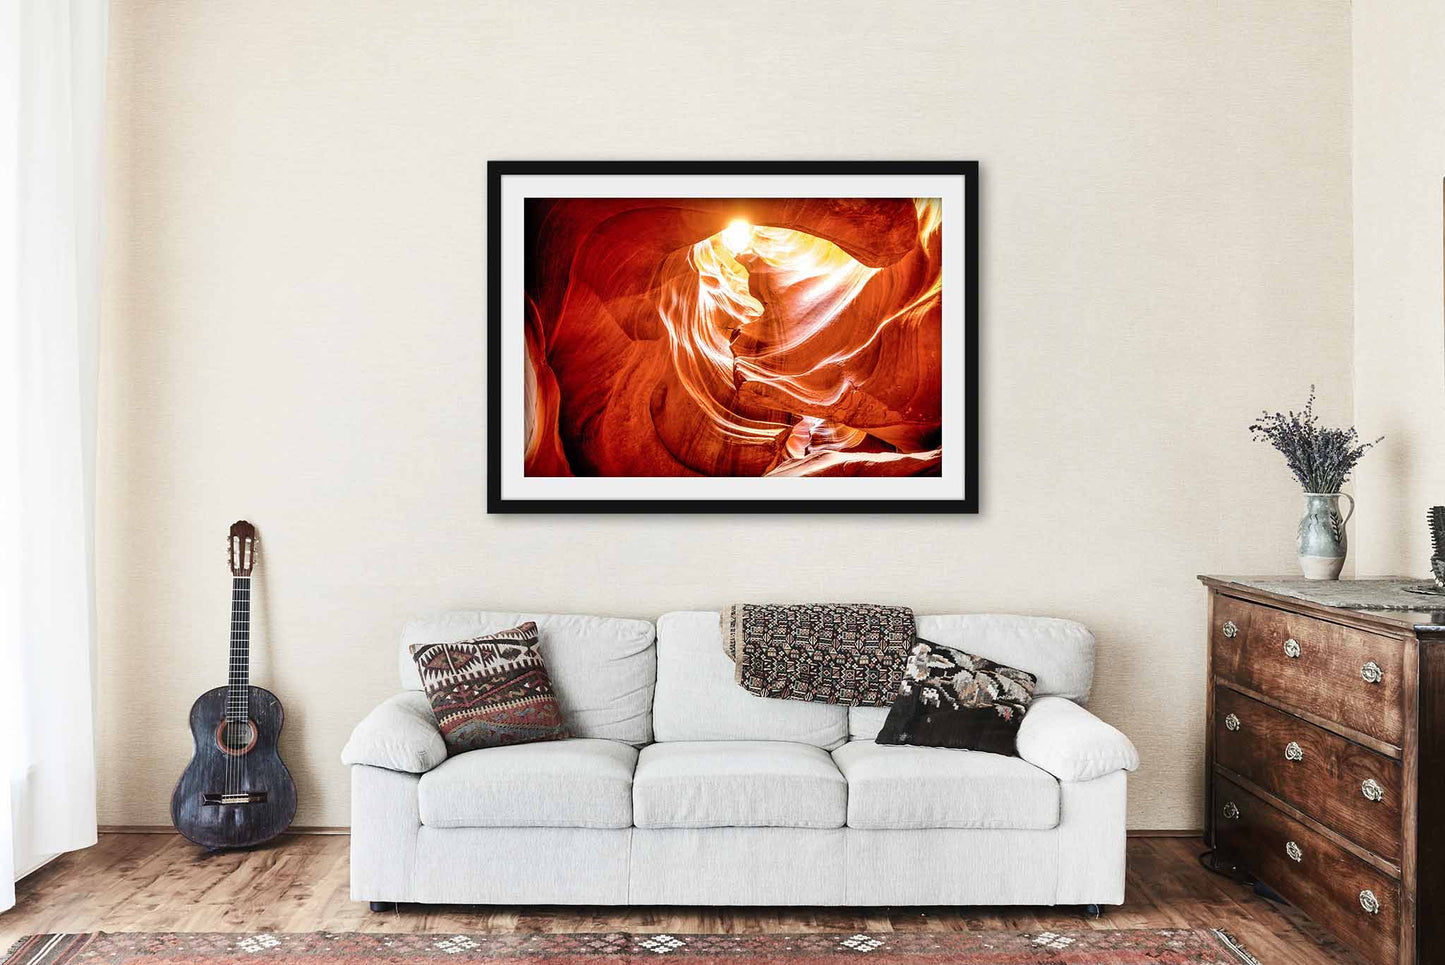 Framed Antelope Canyon Print (Ready to Hang) Picture of Sunlight Shining in Opening of Slot Canyon in Arizona Desert Wall Art Southwestern Decor